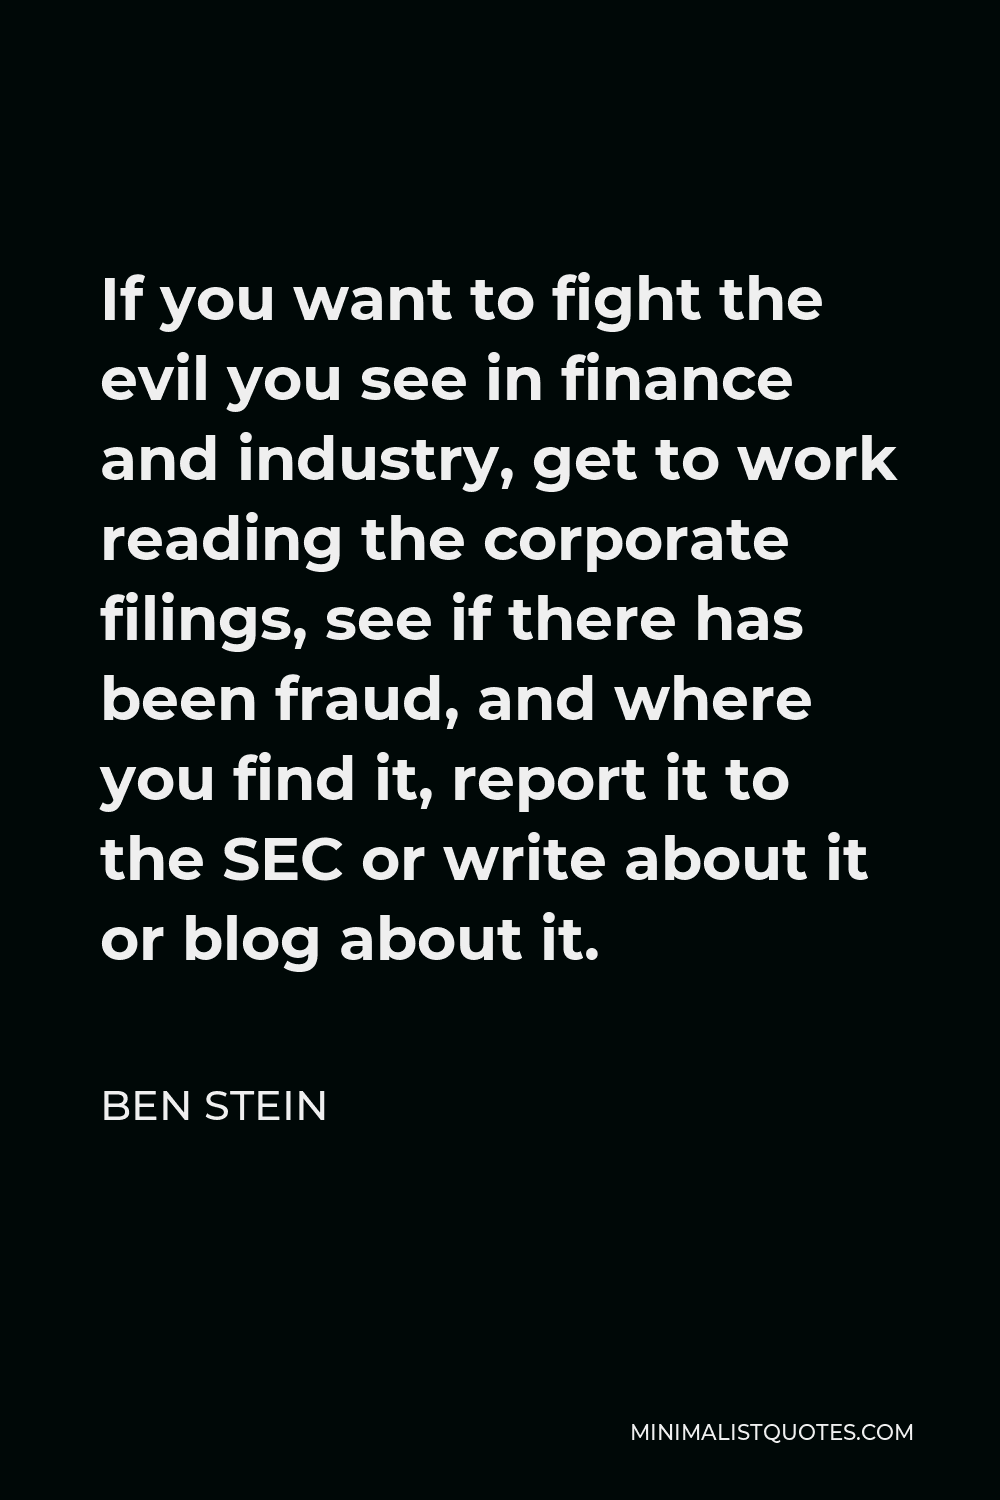 Ben Stein Quote - If you want to fight the evil you see in finance and industry, get to work reading the corporate filings, see if there has been fraud, and where you find it, report it to the SEC or write about it or blog about it.